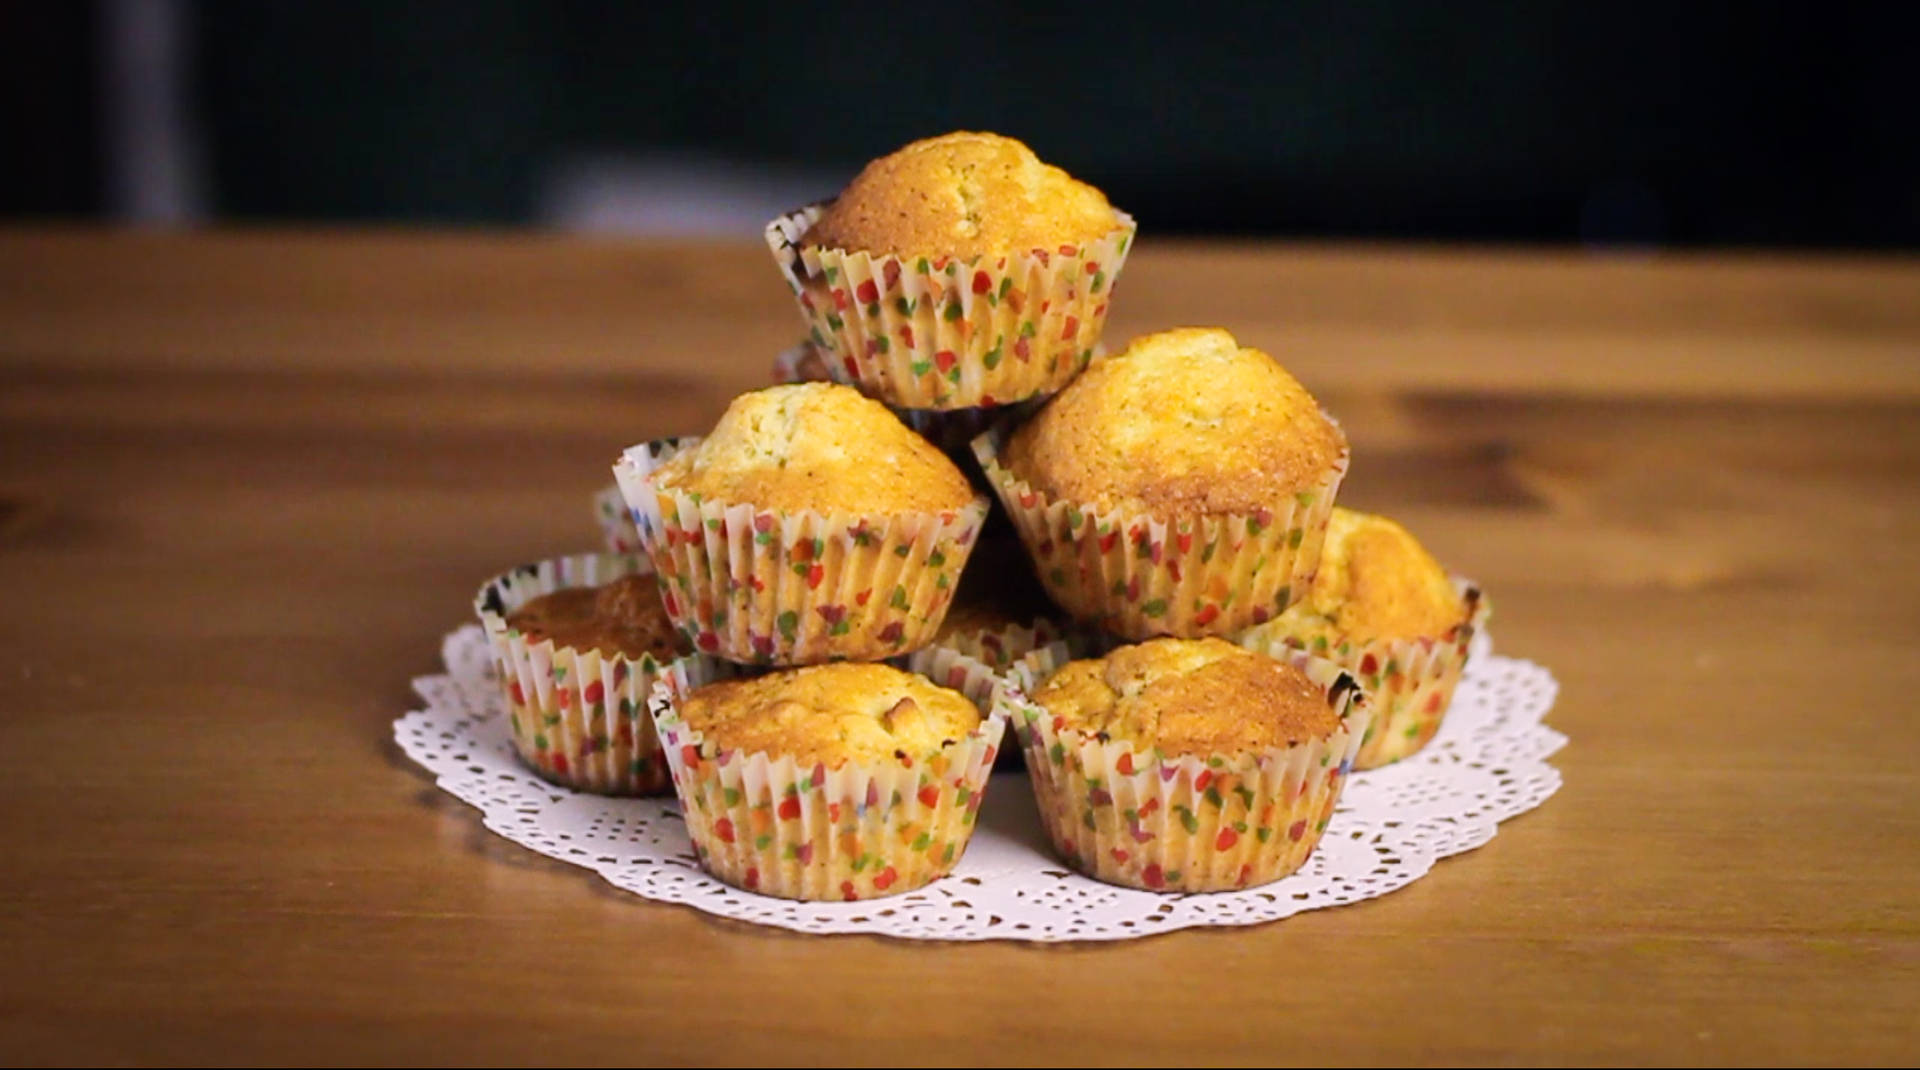 Muffin Pyramid On Table Background